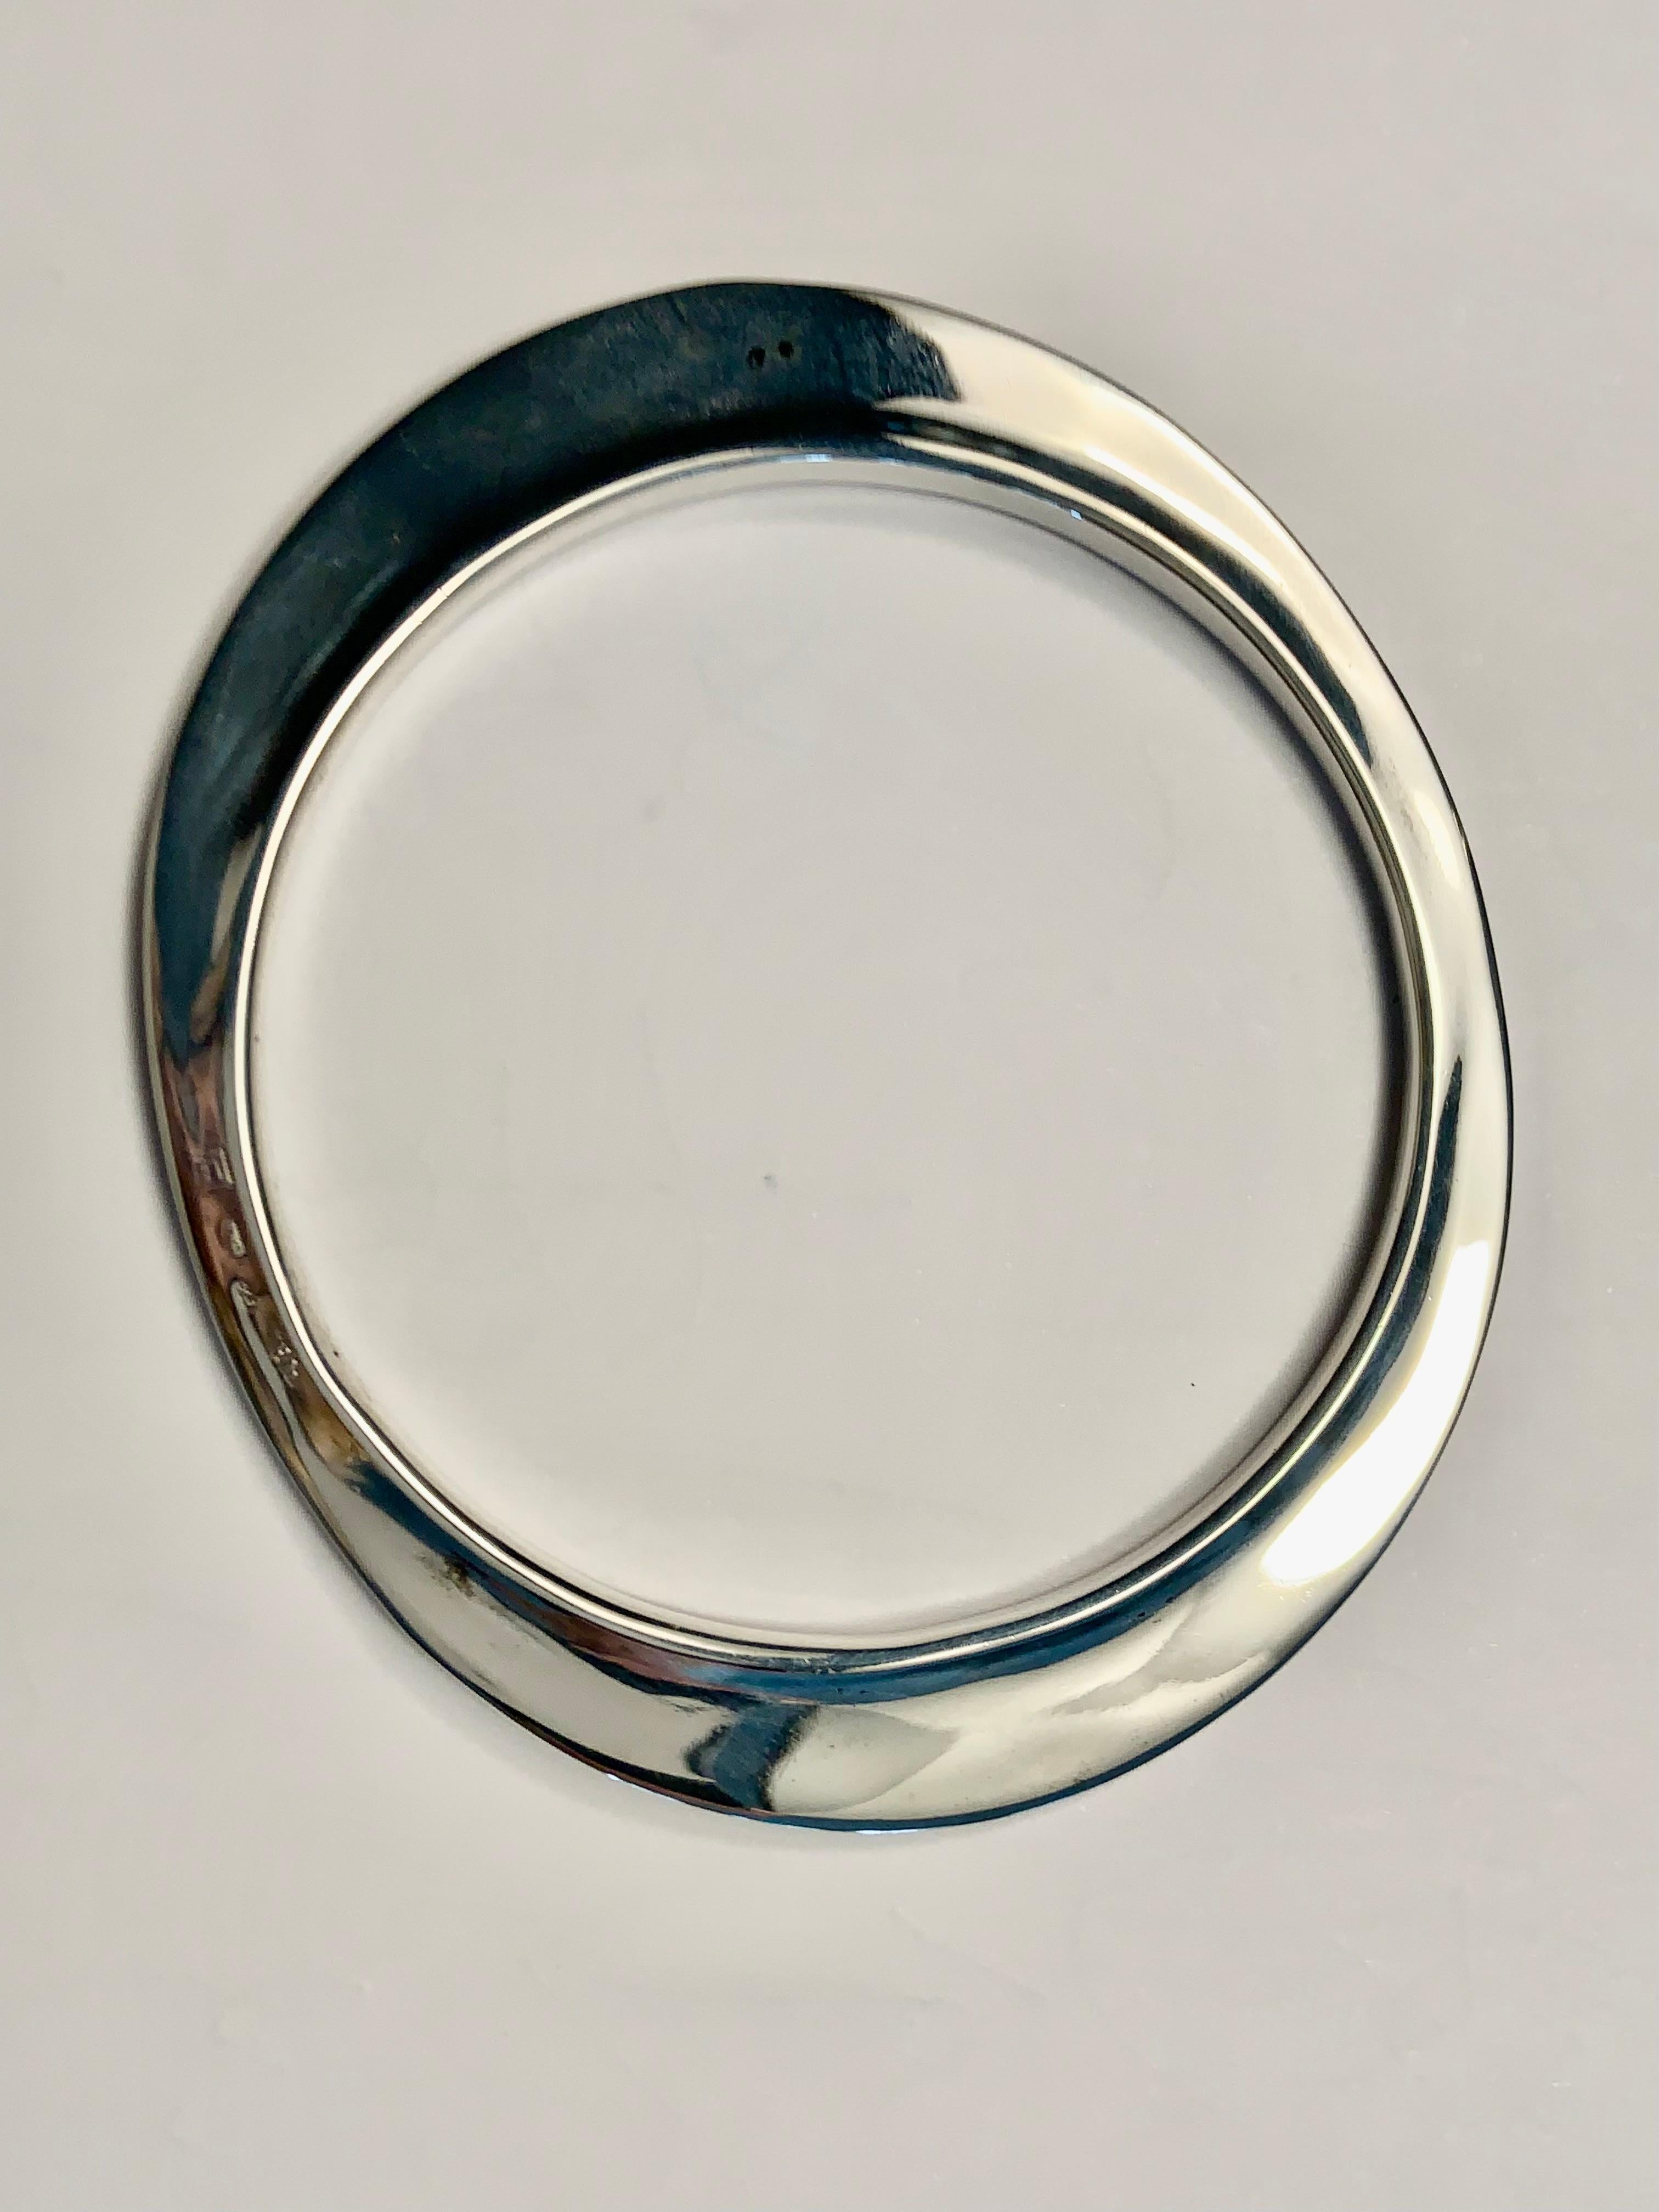 This flying saucer bracelet is from the very early days of the Elsa Peretti and Tiffany & Co partnership.  It is marked E for Elsa Peretti, 925 and T& Co.  The oval bracelet has a raised lip at the center opening and it is wider on the two long ends